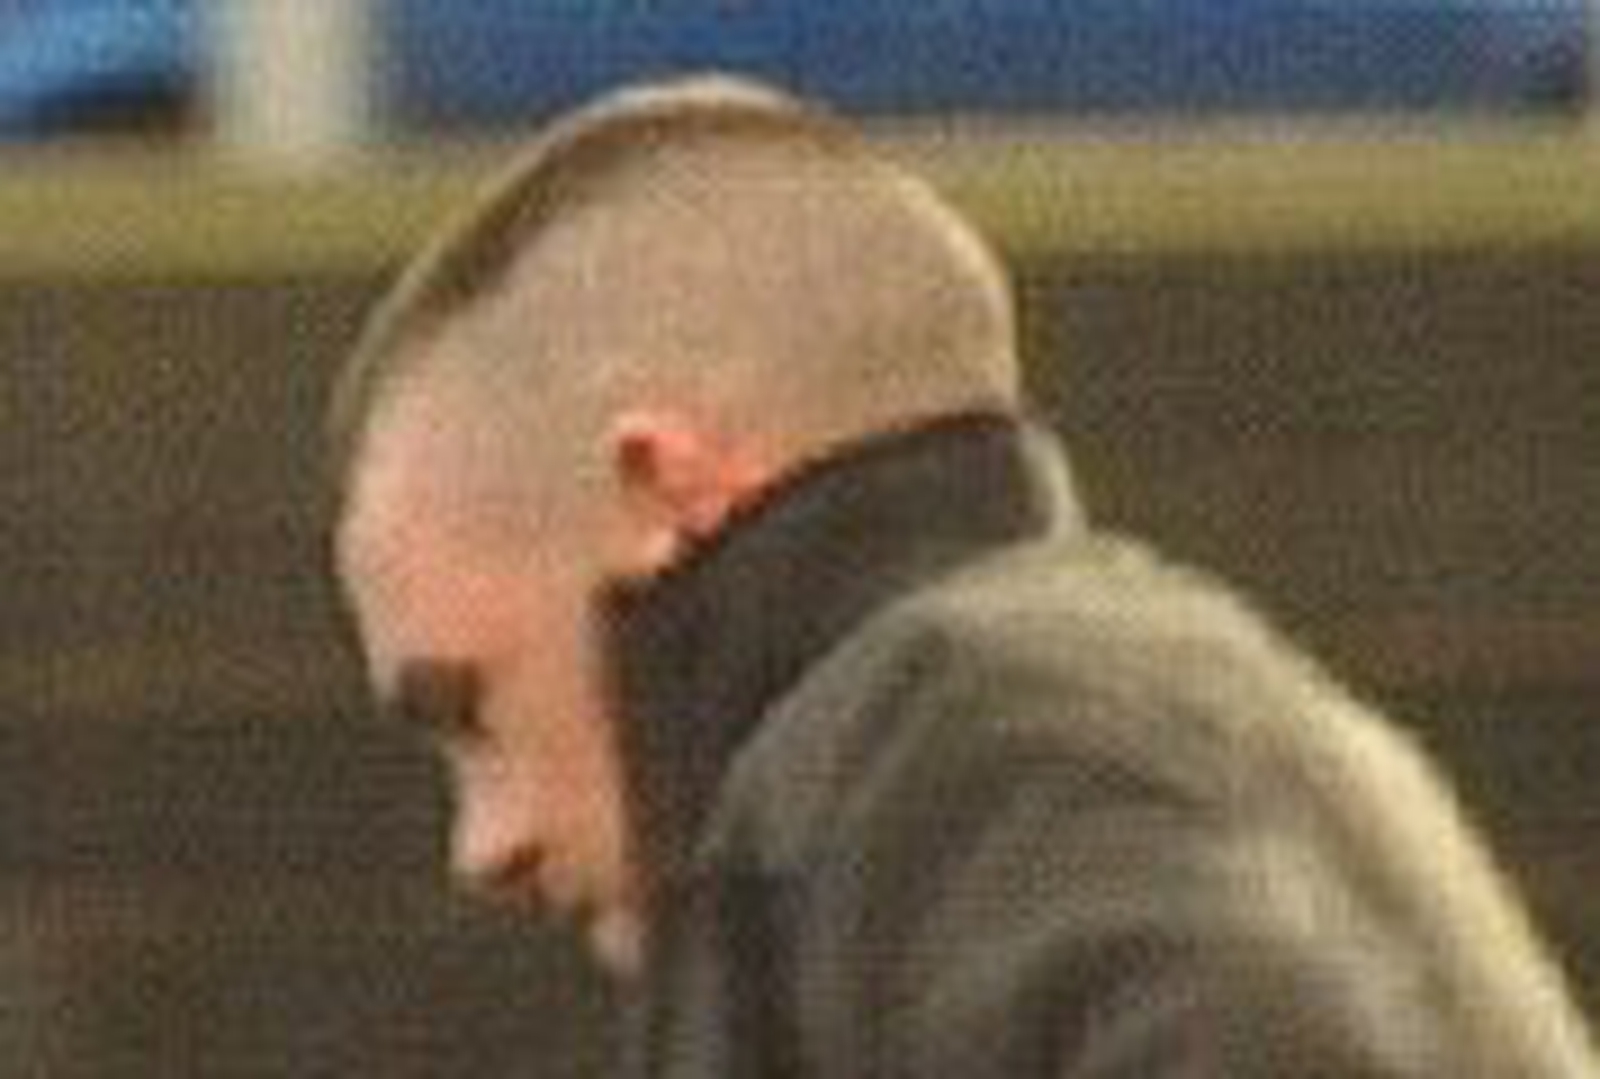 Youth Given Life Sentence For Coolock Murder